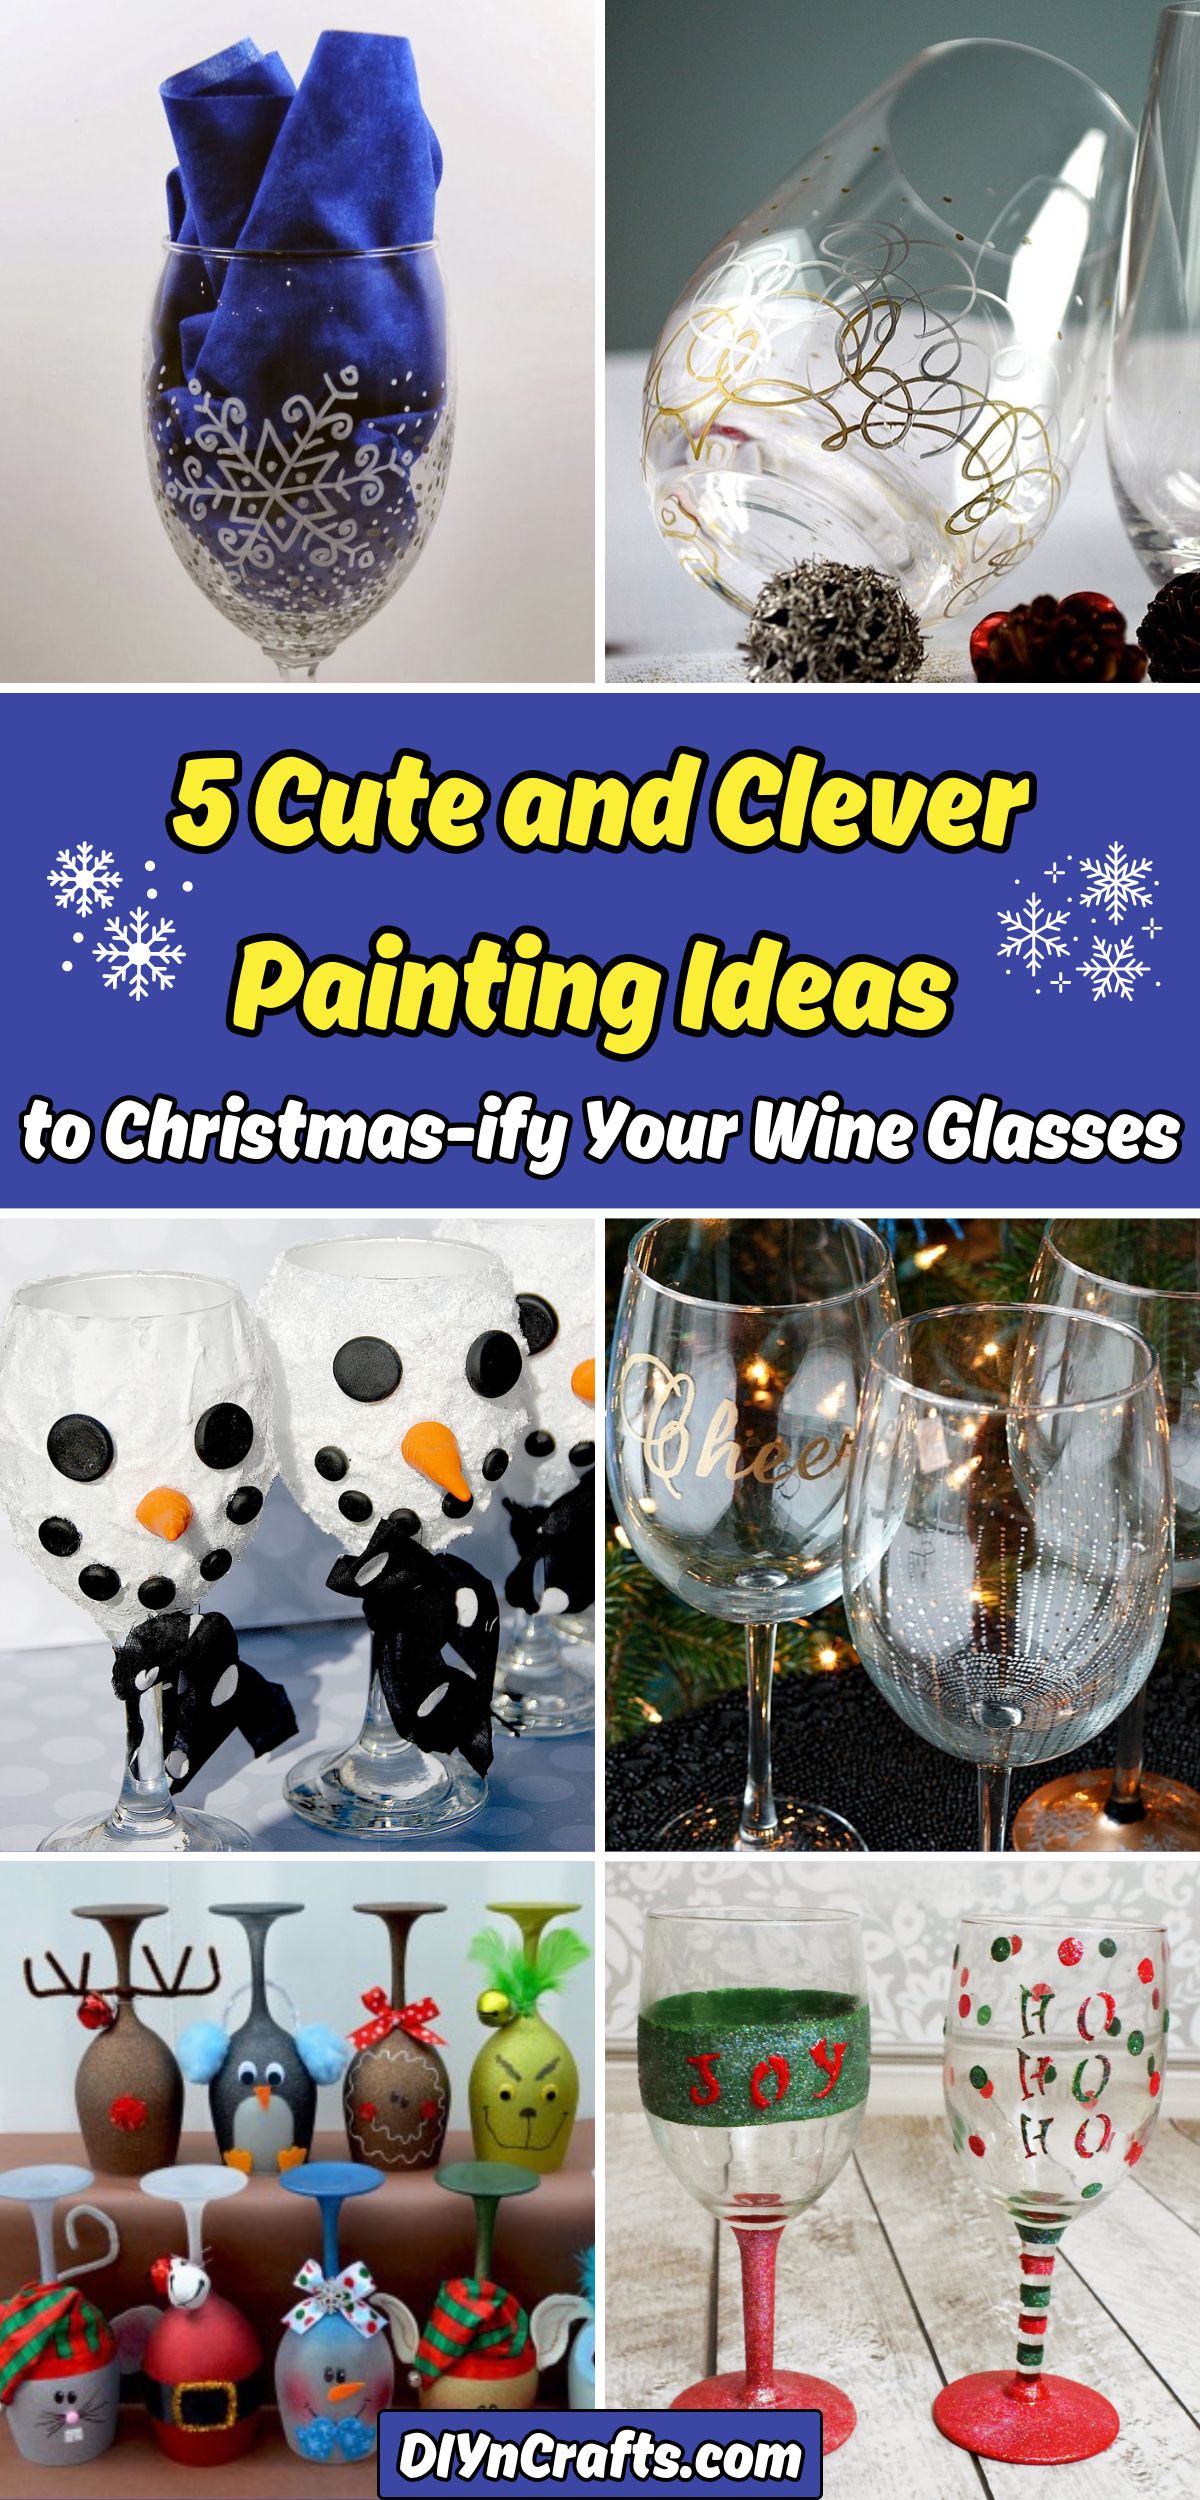 5 Cute and Clever Painting Ideas to Christmas-ify Your Wine Glasses collage.